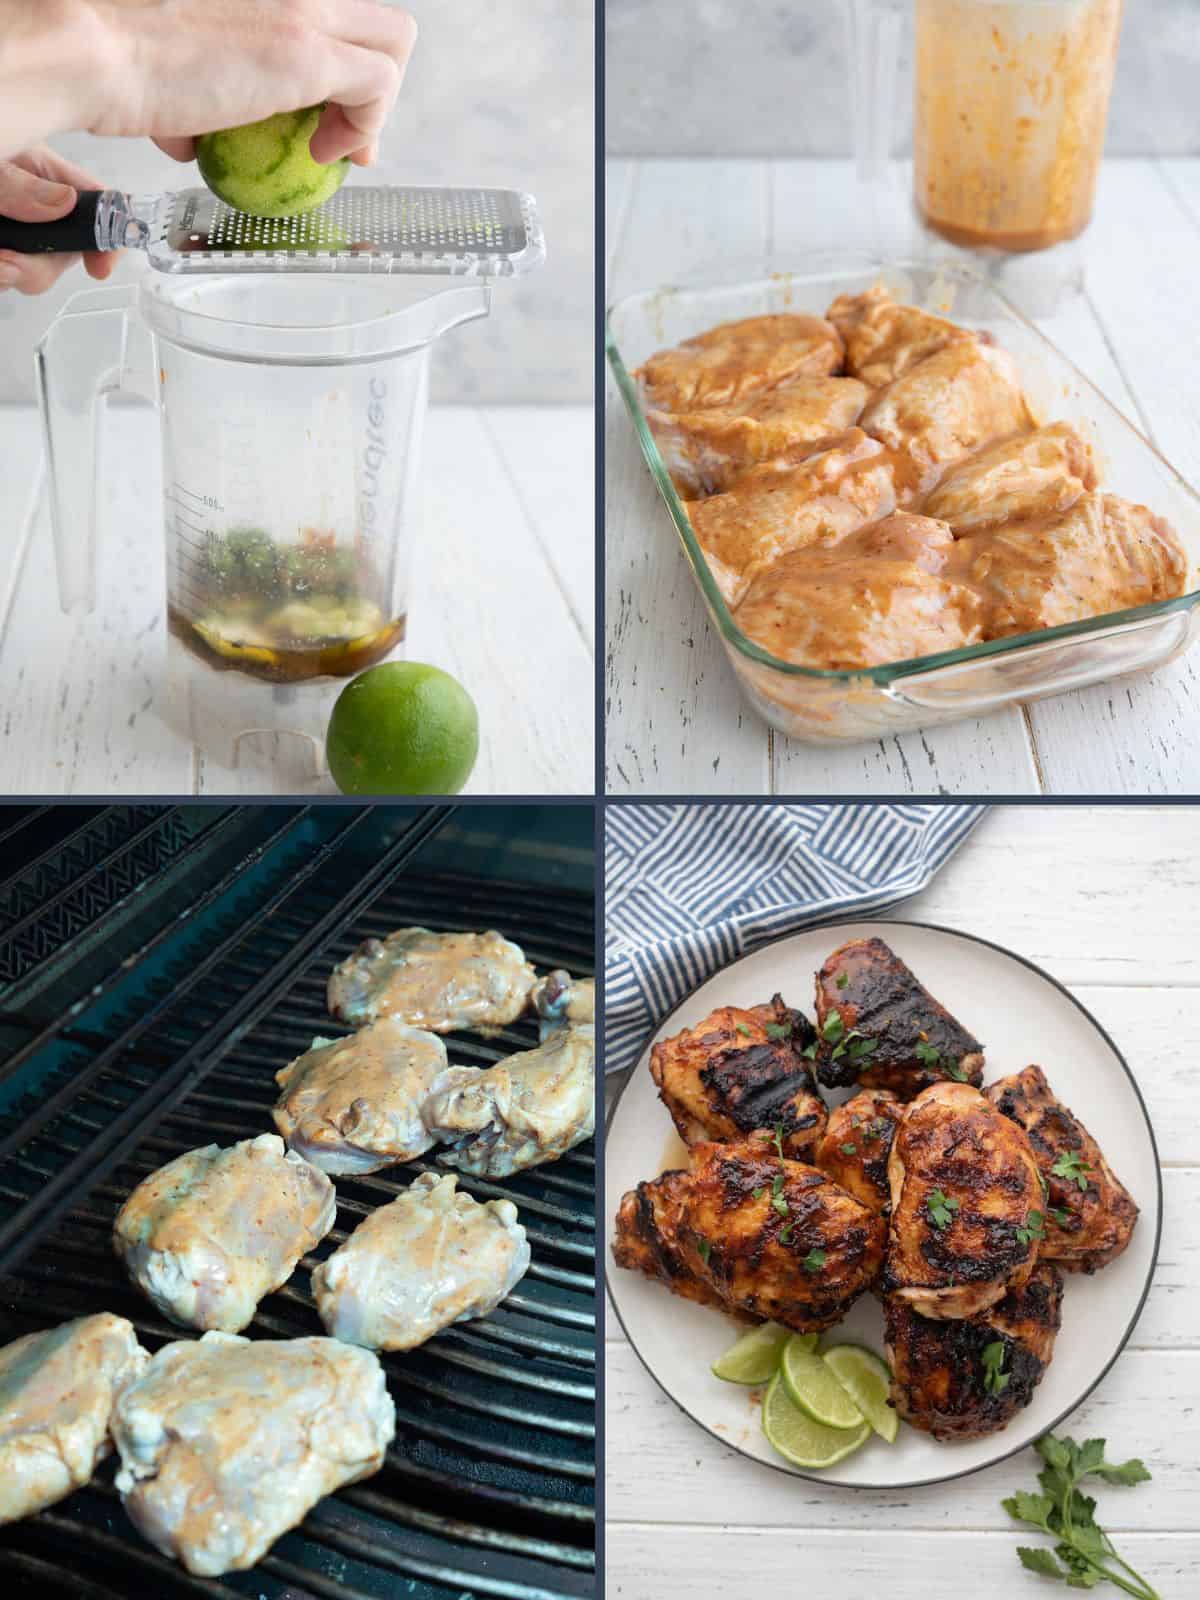 A collage of 4 images showing the steps for making Chipotle Lime Chicken.